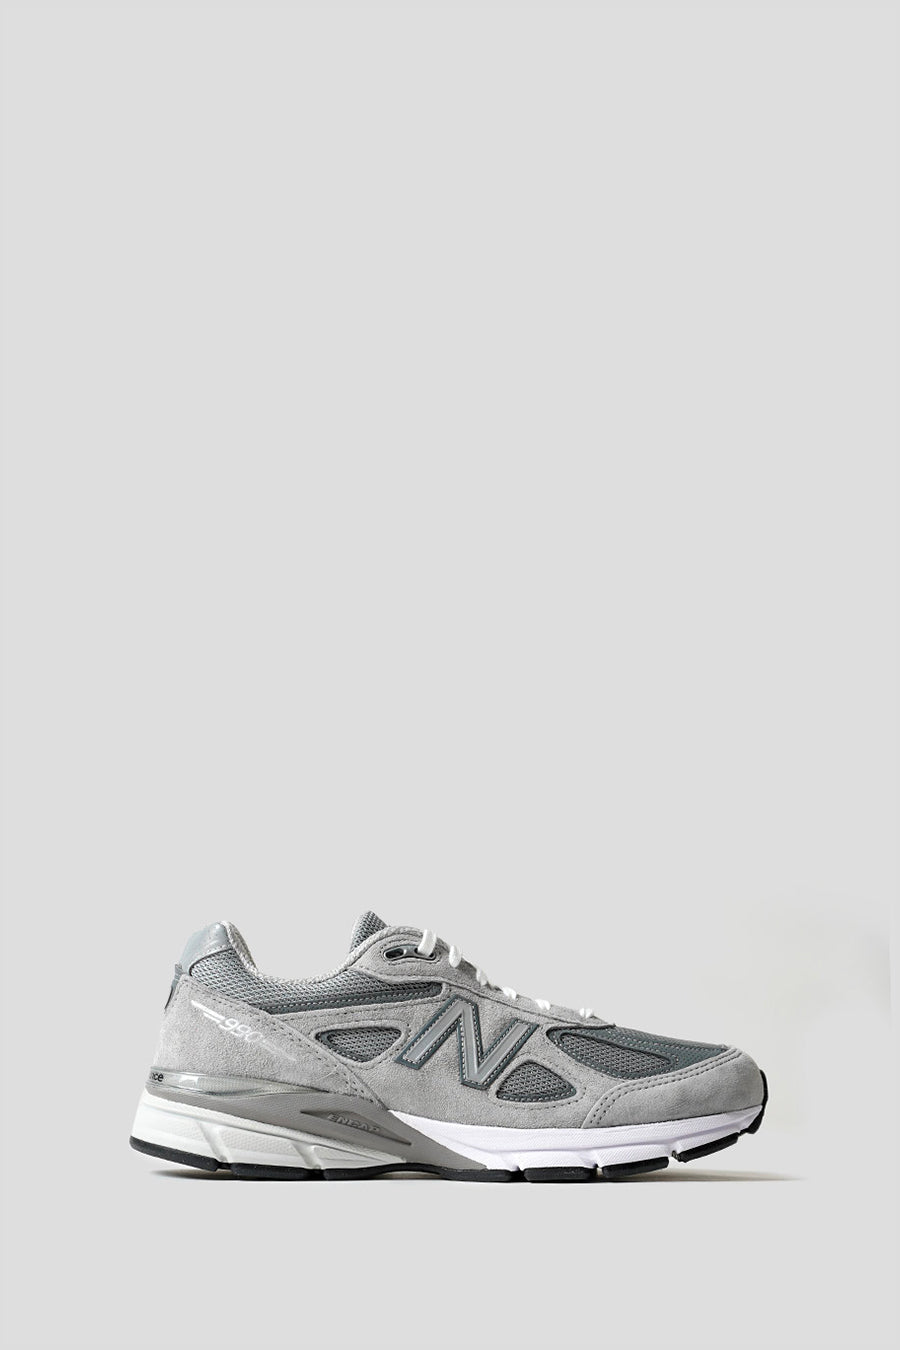 NEW BALANCE - SNEAKERS 990V4 MADE IN USA GREY ET SILVER - LE LABO STORE